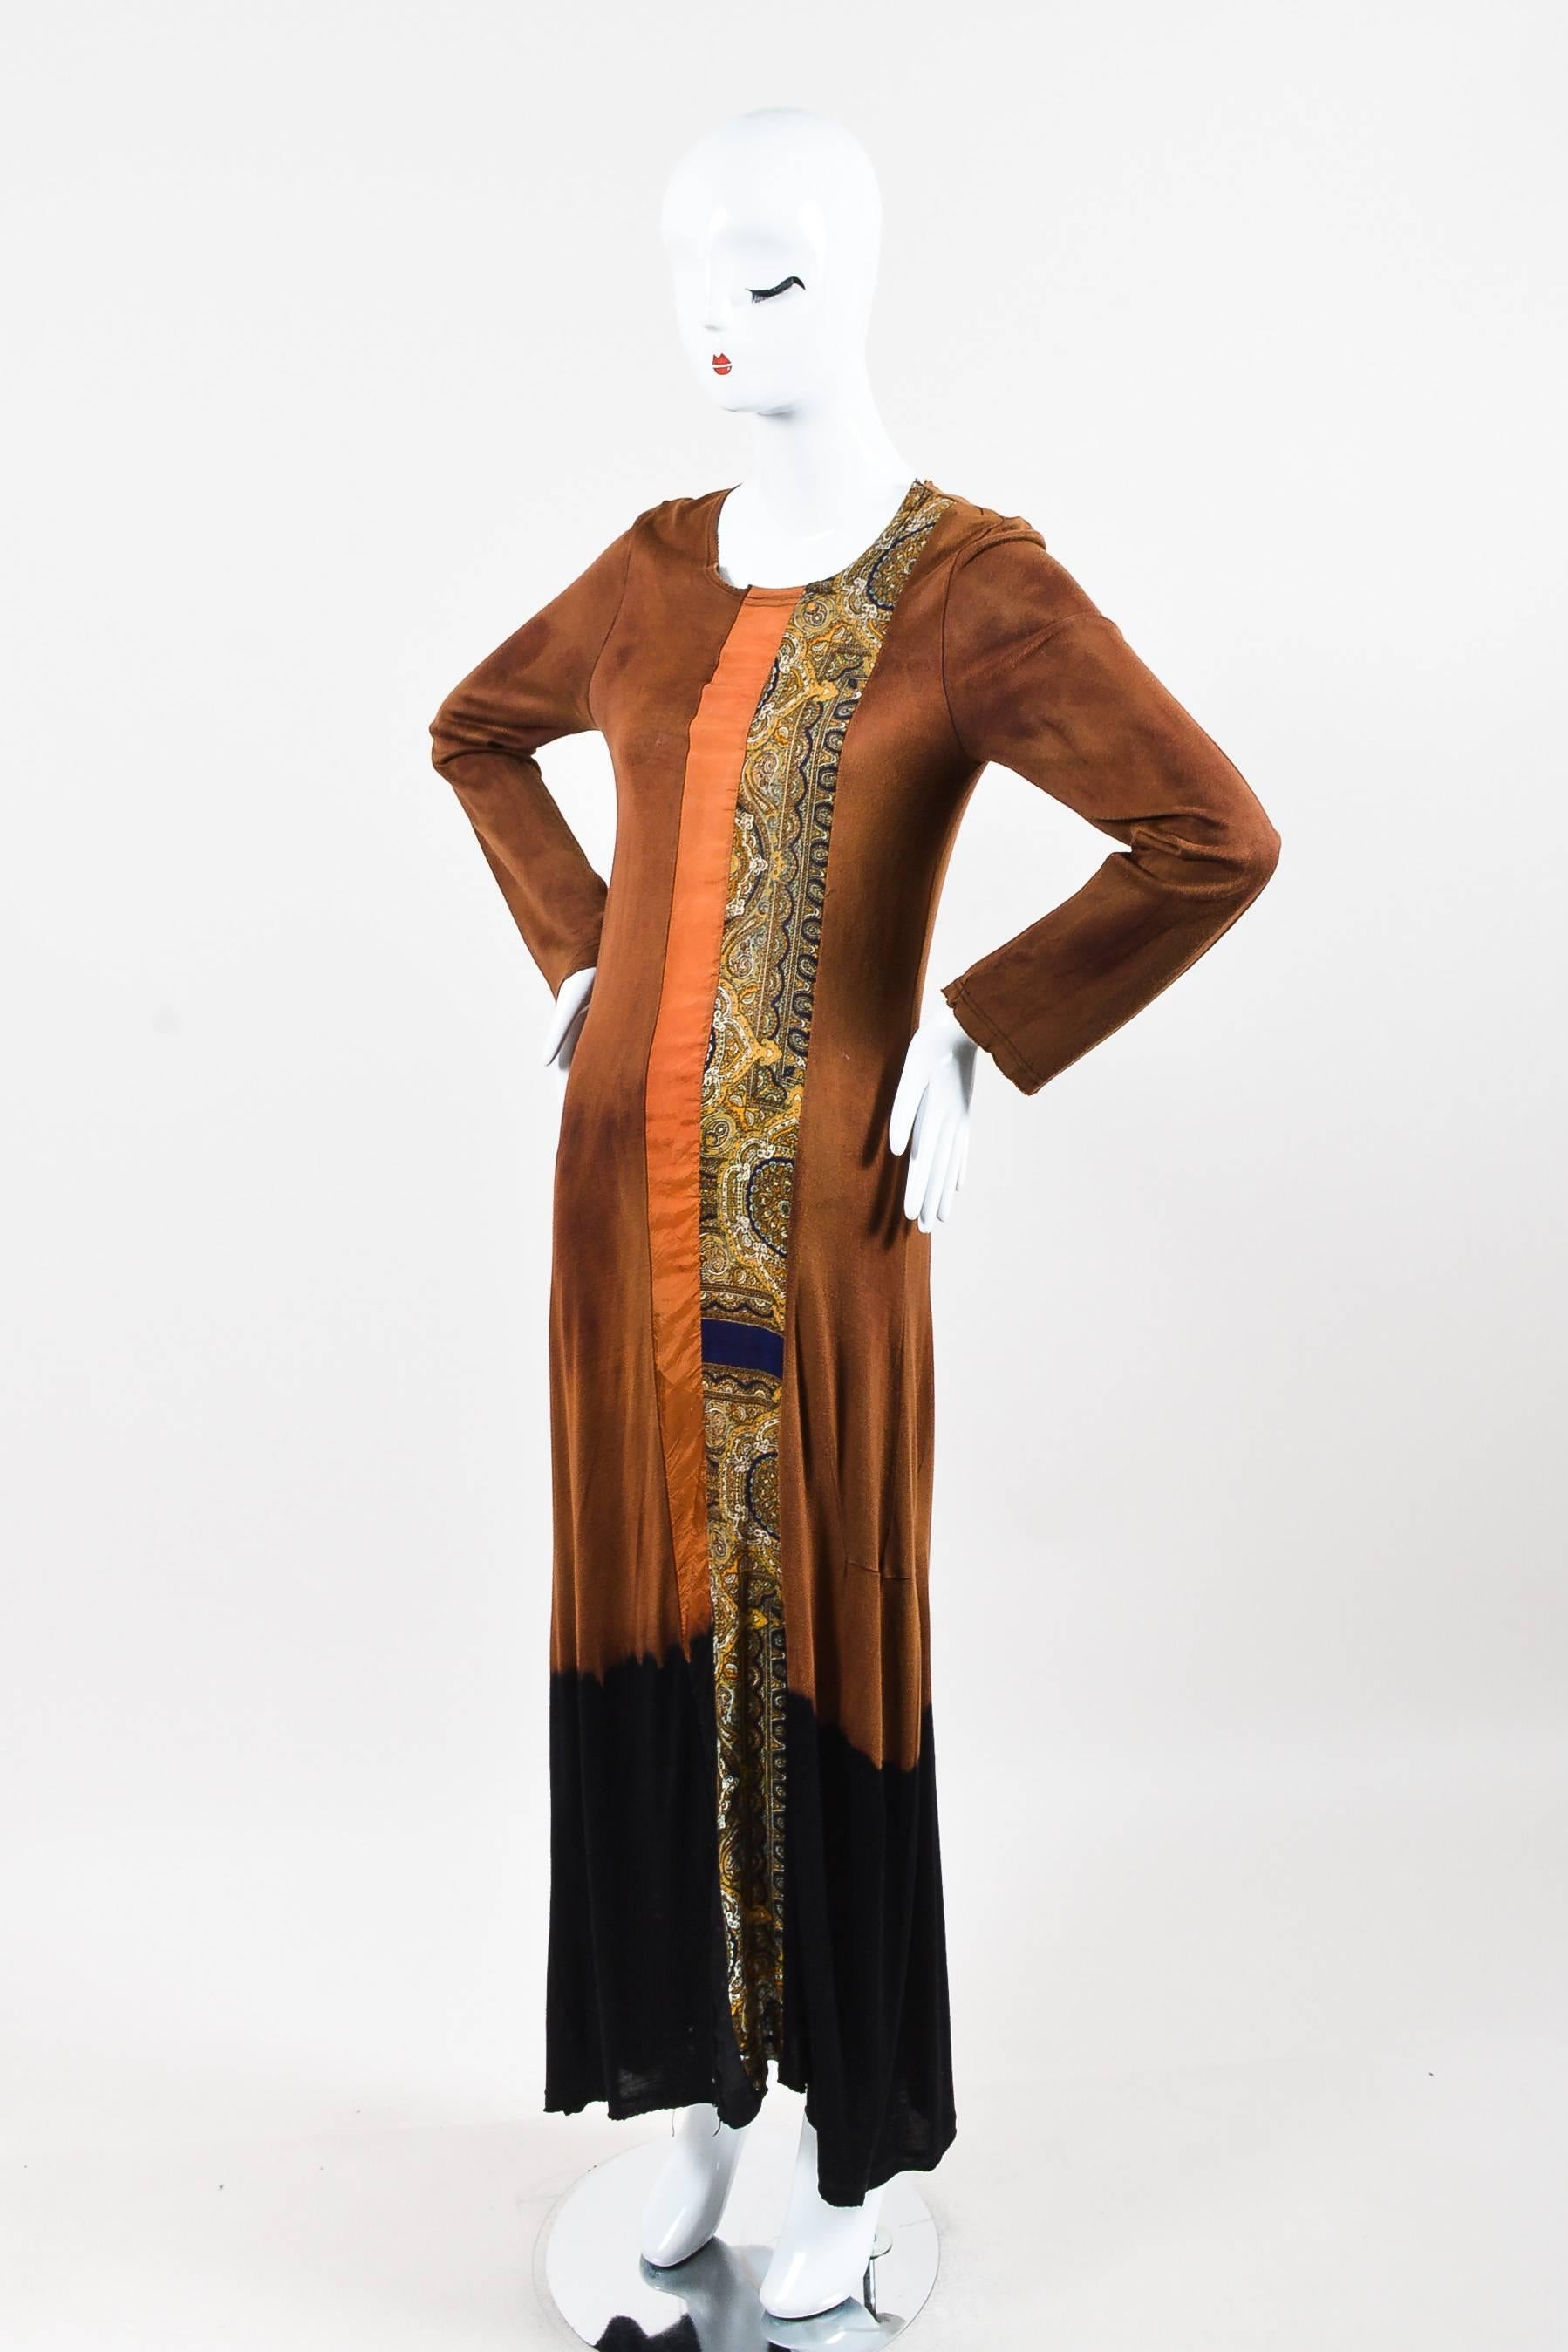 Tan maxi dress. Faded look with black dip dyed bottom. Burnt orange and paisley multicolor trim. Unfinished edges. Long sleeves. Scoop neckline.

Additional measurements: Sleeve Length 26